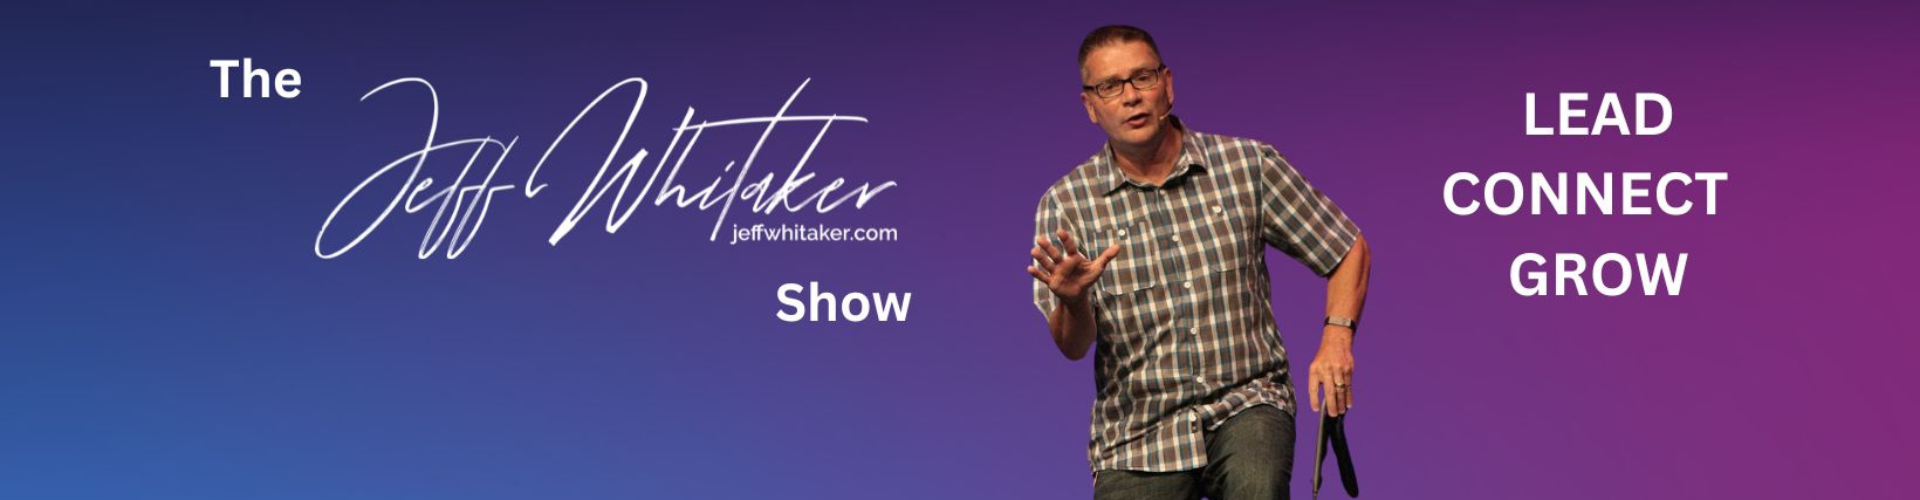 The Jeff Whitaker Show